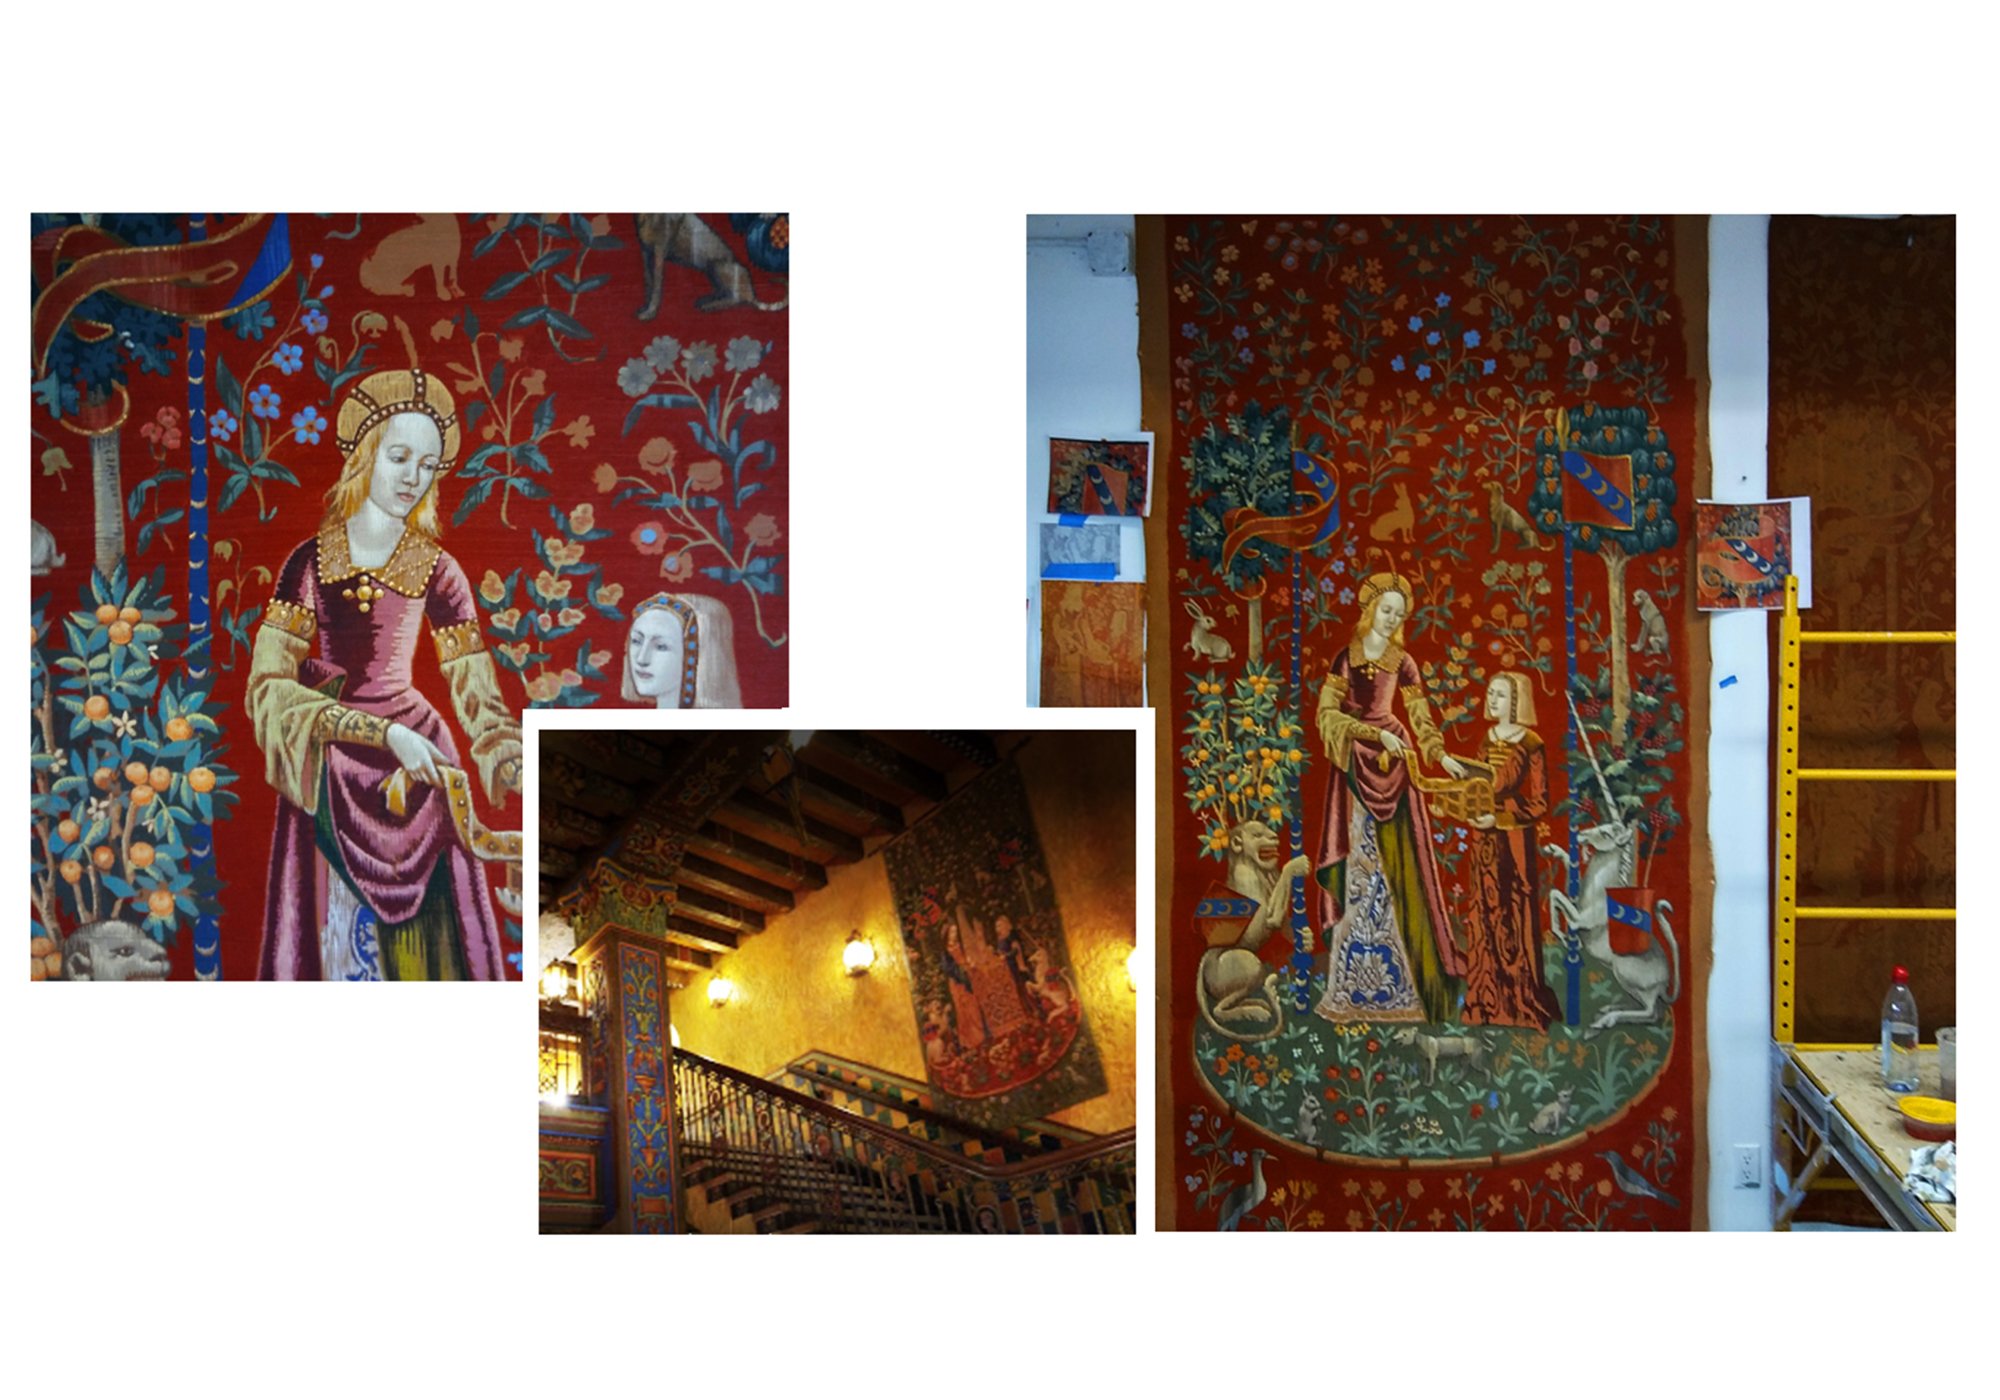 Tapestry Murals for Historic Theater, Fla. for Evergreene Architectural Arts